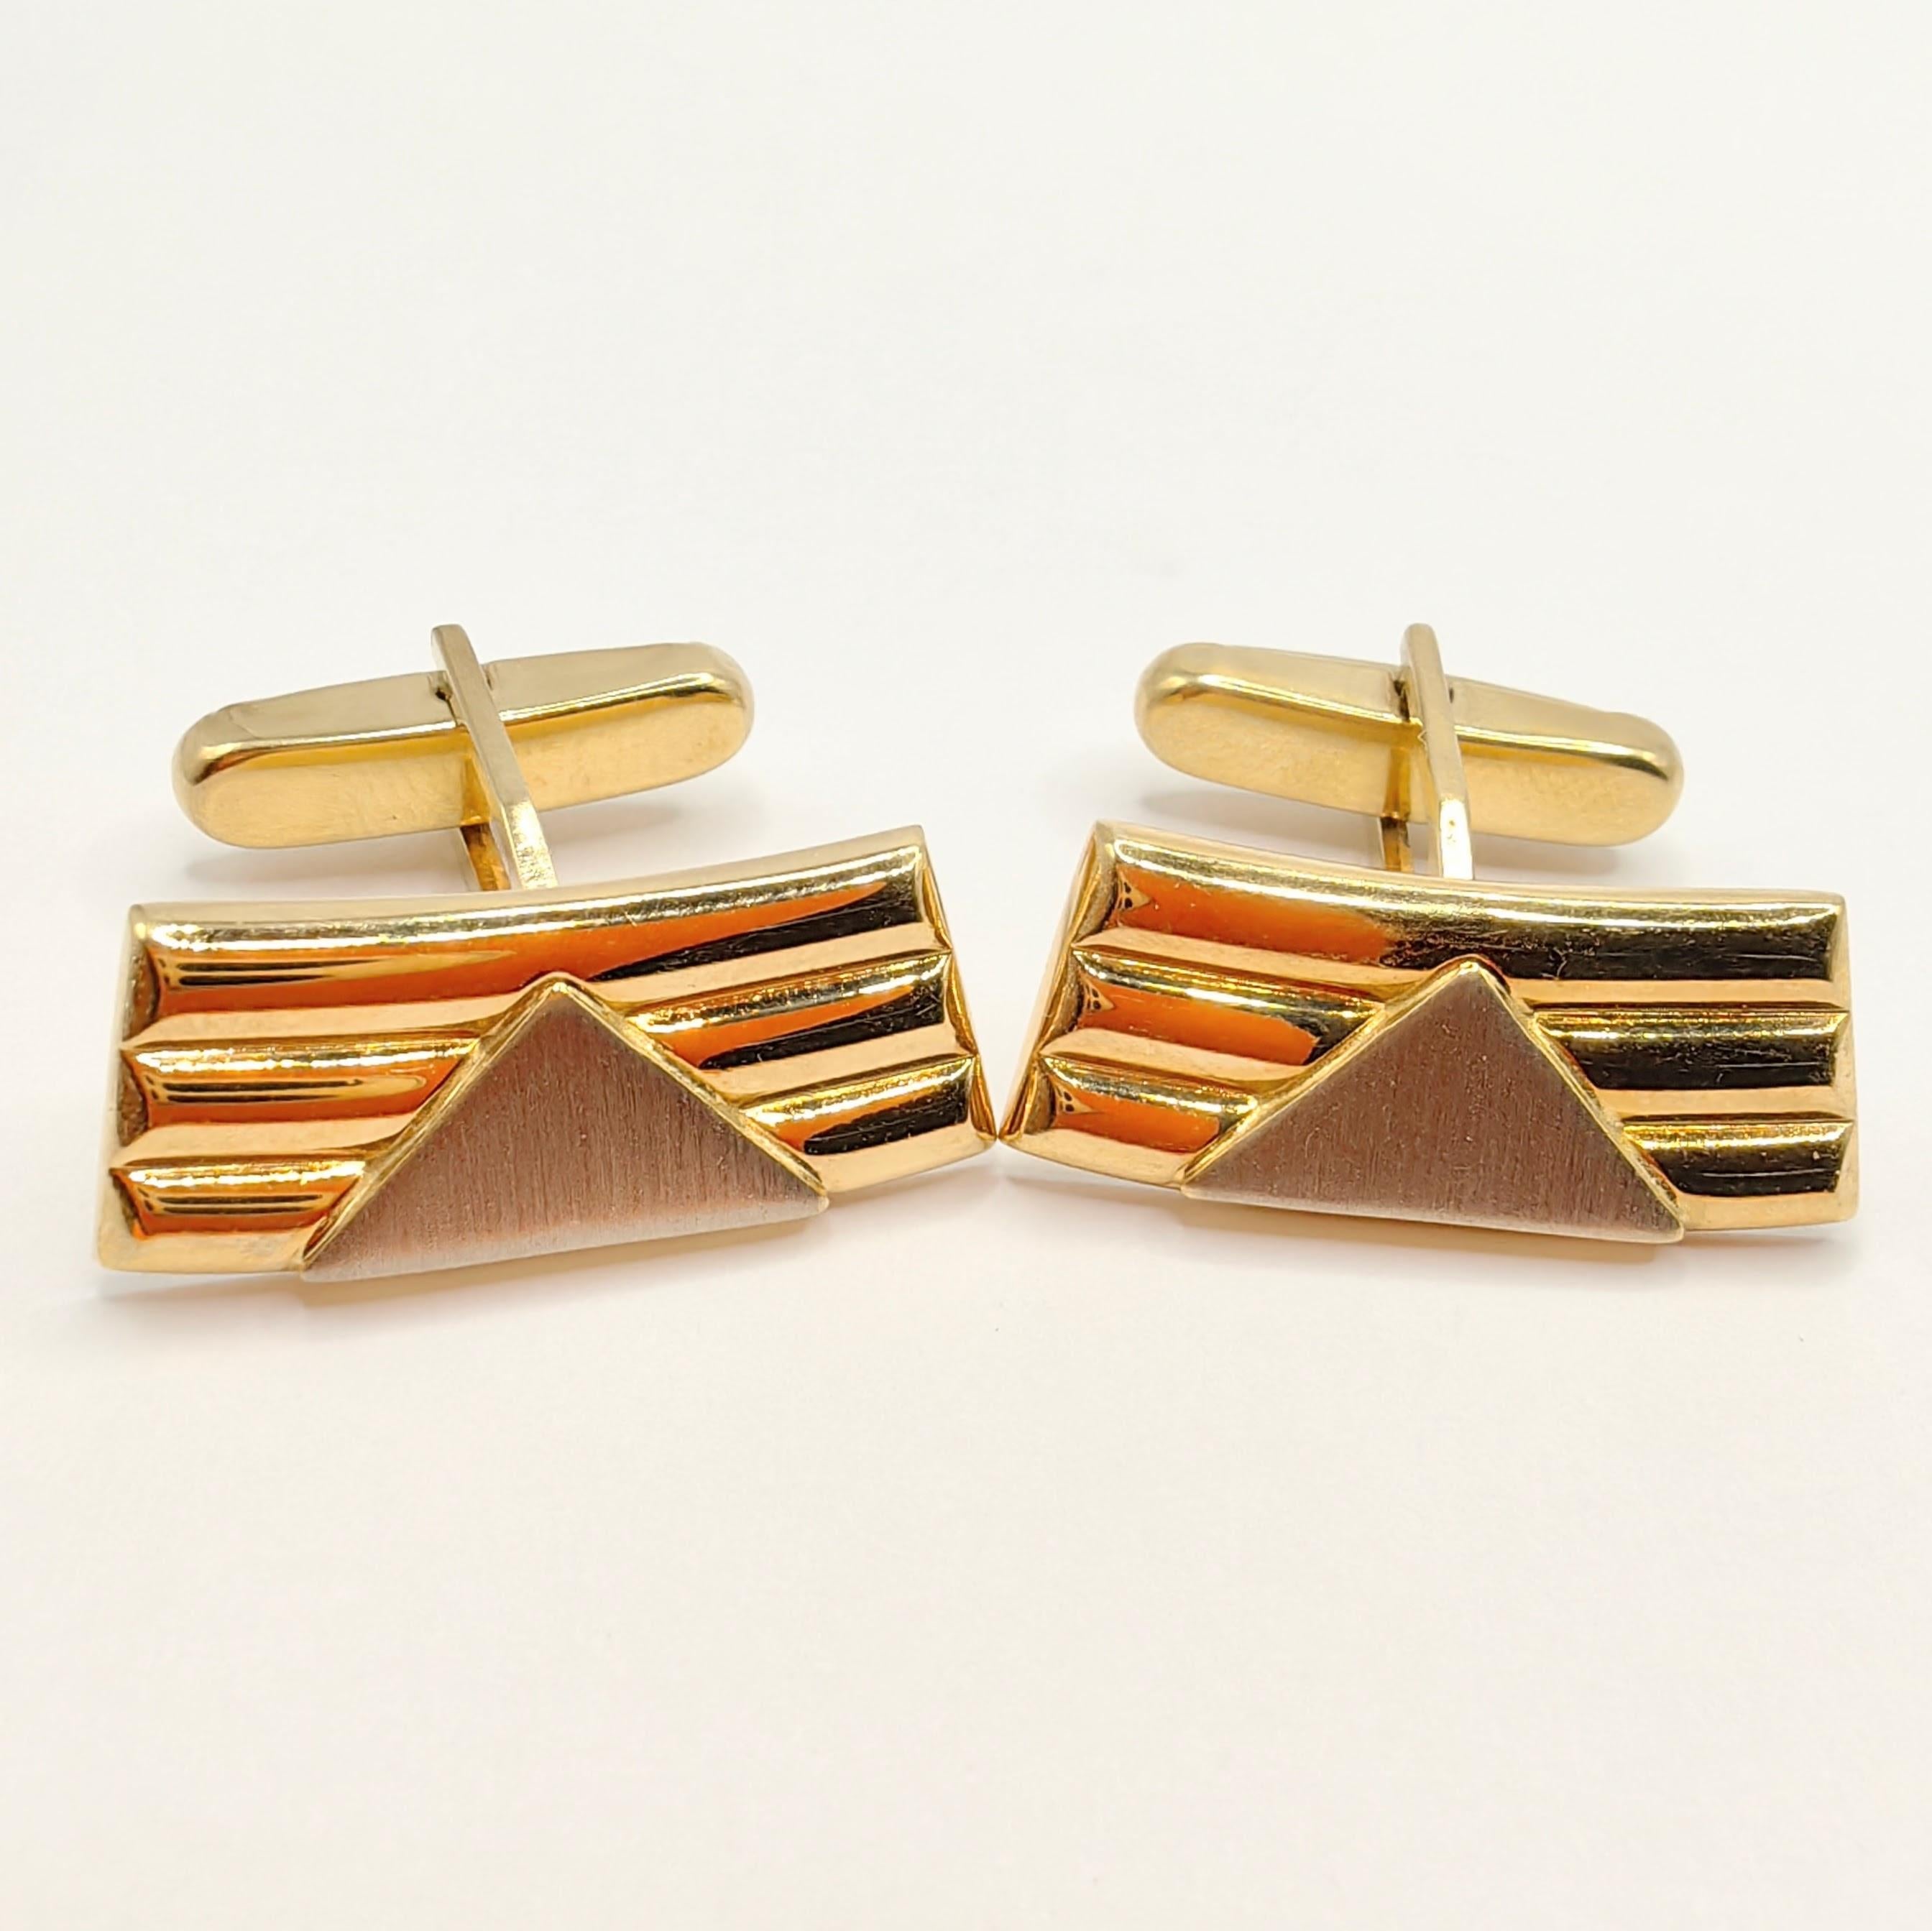 Introducing our Vintage Fan Shape 18K Yellow & White Two-tone Gold Cufflinks, a luxurious accessory that adds a touch of elegance and sophistication to your formal attire.

These exquisite cufflinks feature a fan-shaped design, with a white gold